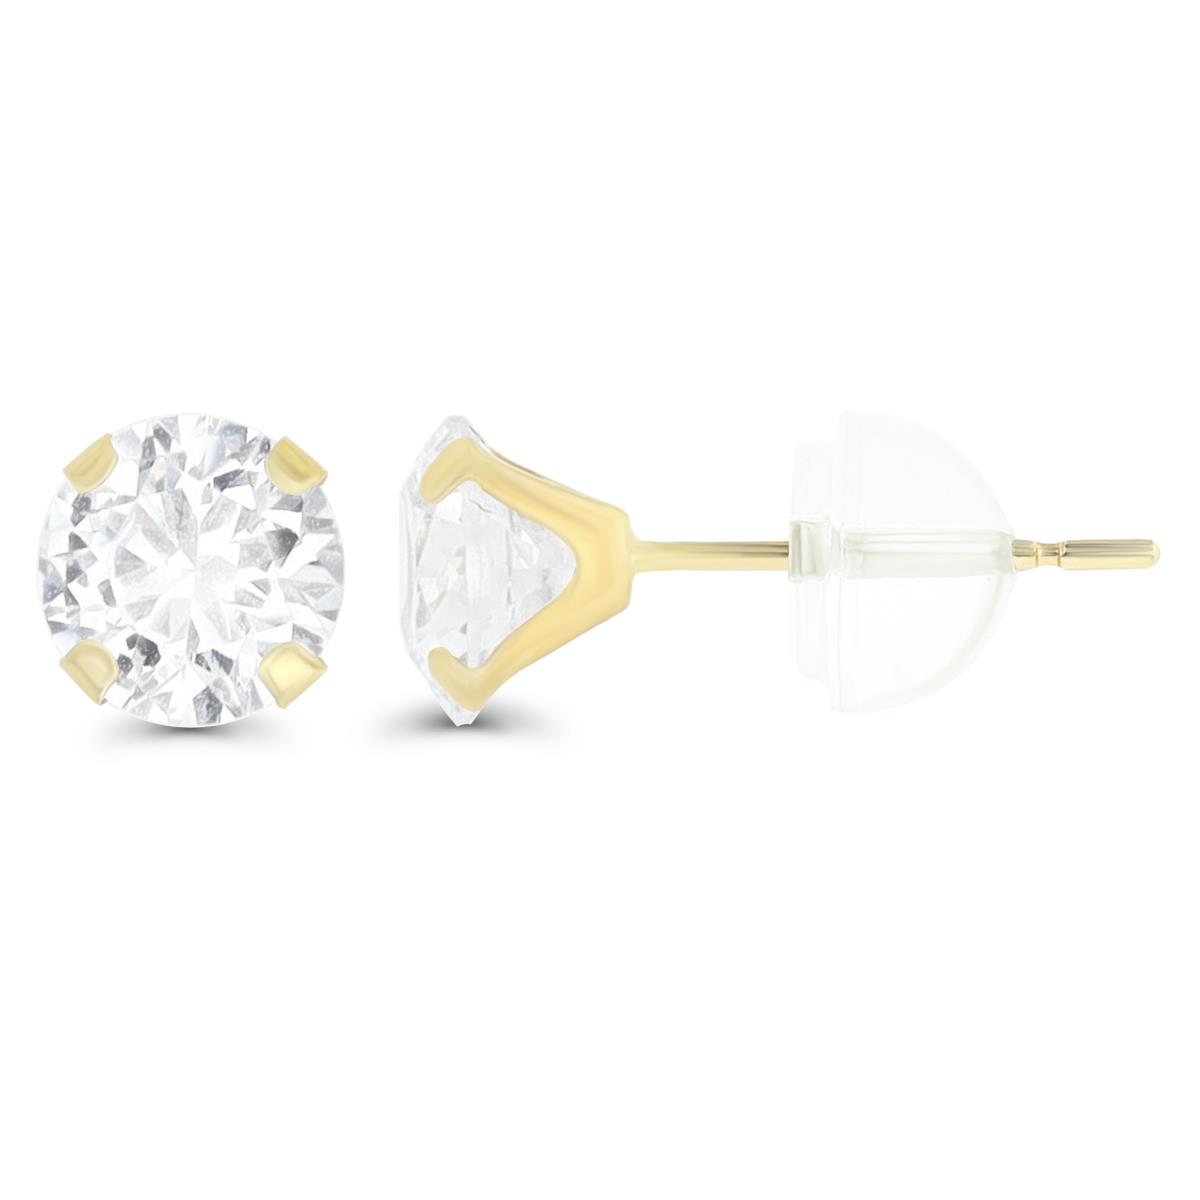 10K Yellow Gold 6mm Martini Round Cut Solitaire Stud Earring